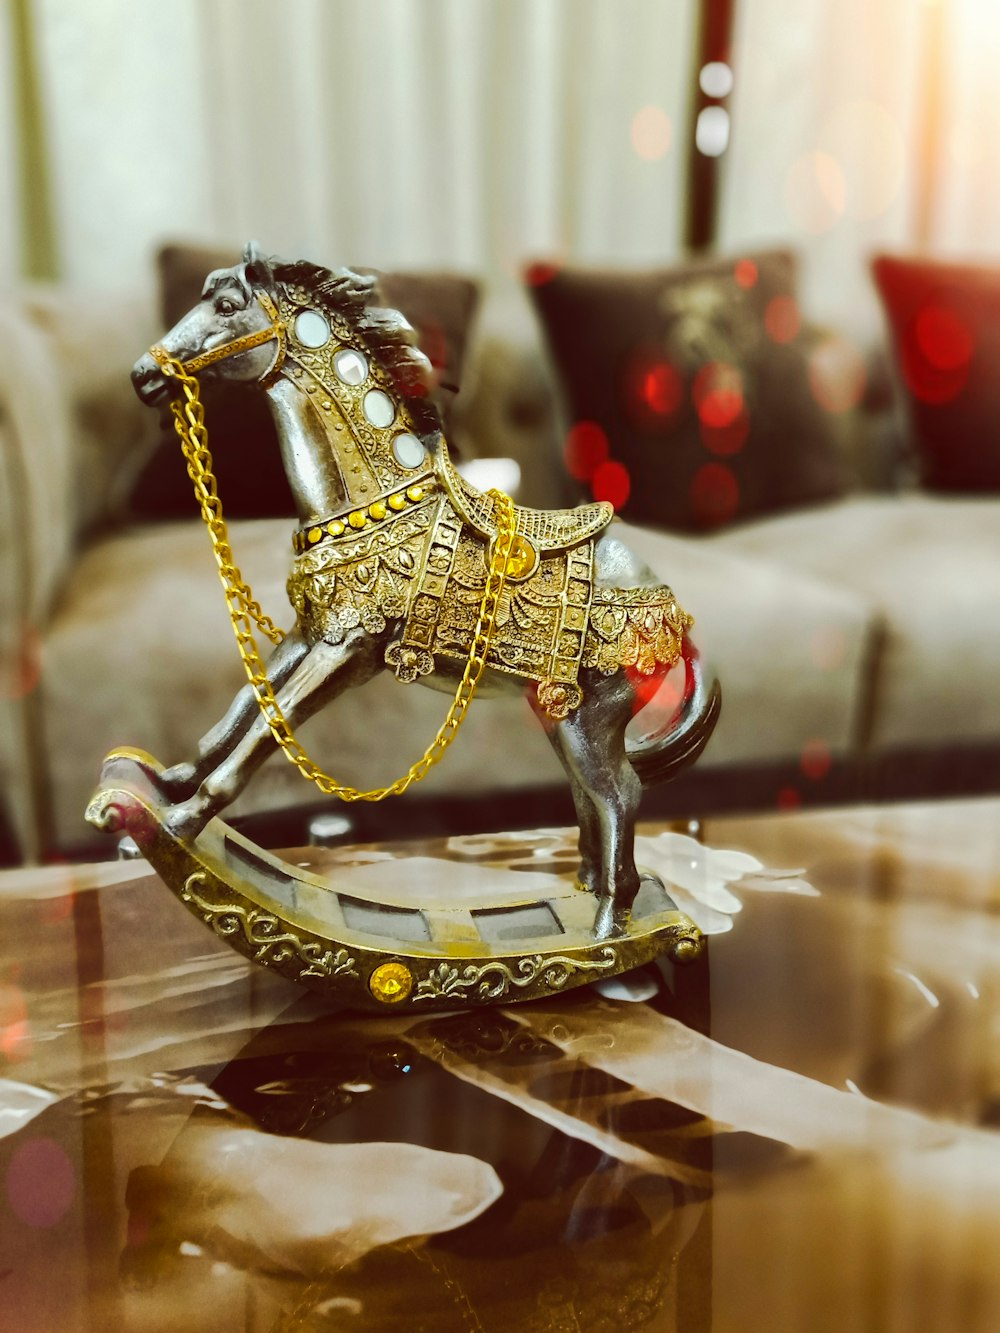 gold-colored and silver-colored rocking horse figurine